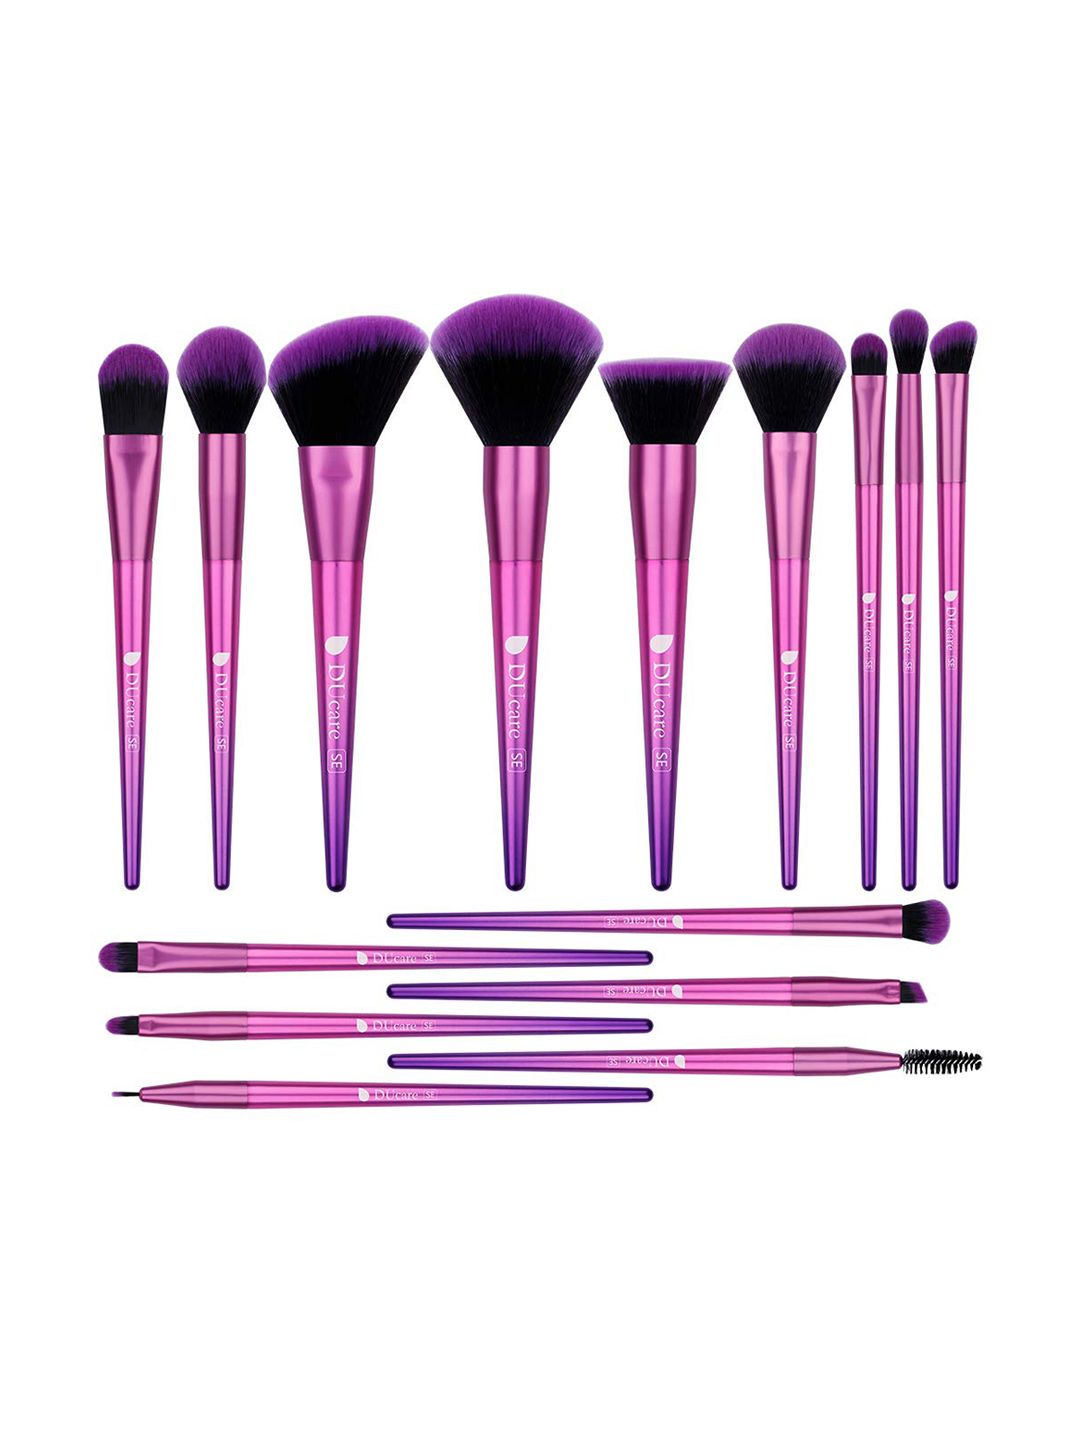 Ducare Set Of 15 Pink & Purple Synthetic Makeup Brushes Price in India